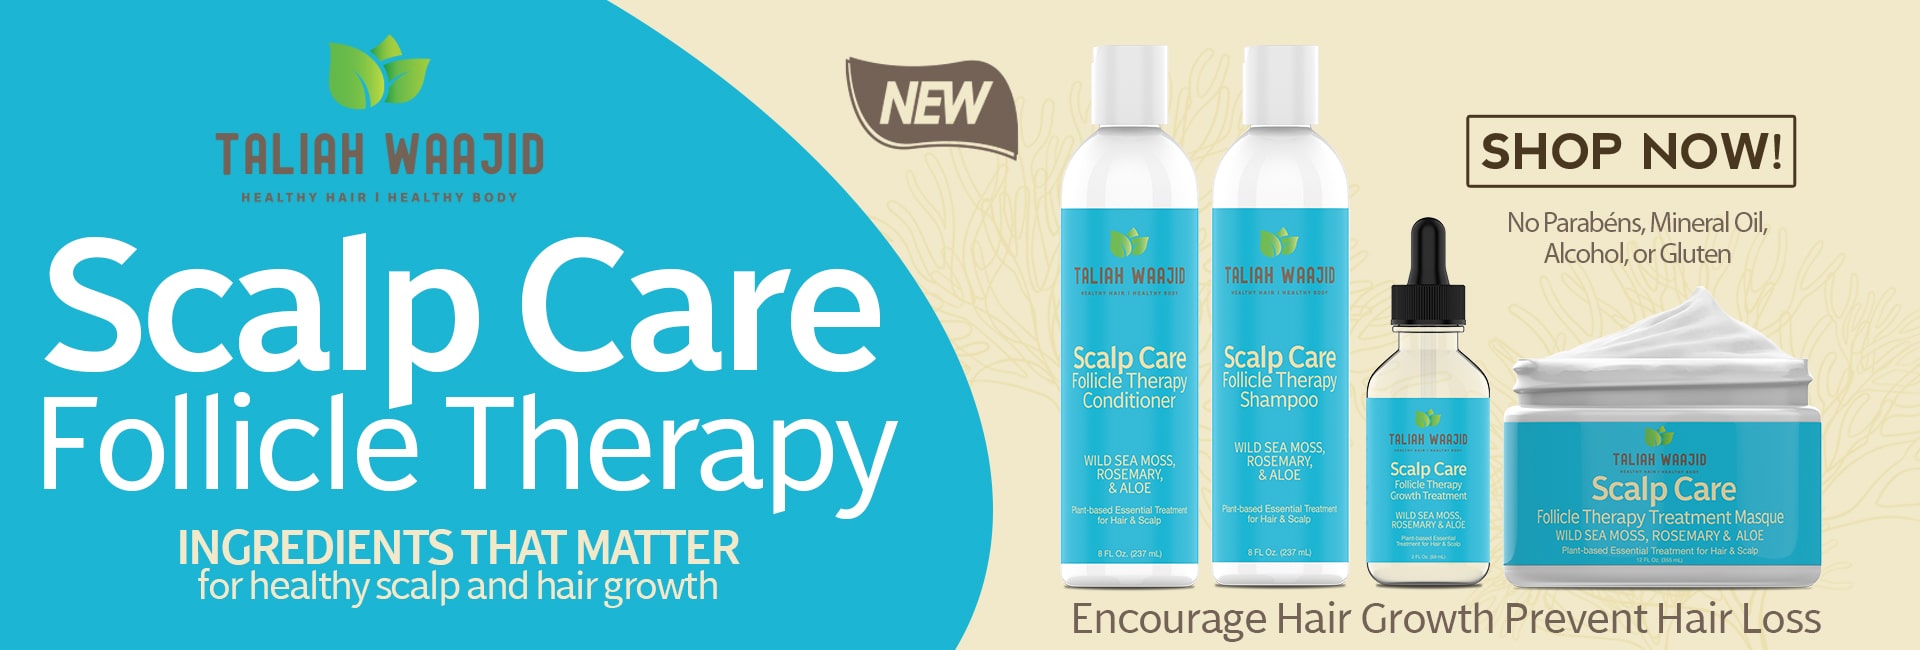 Taliah Waajid Scalp Care Follicle Therapy This product encourage hair growth and prevent hair loss